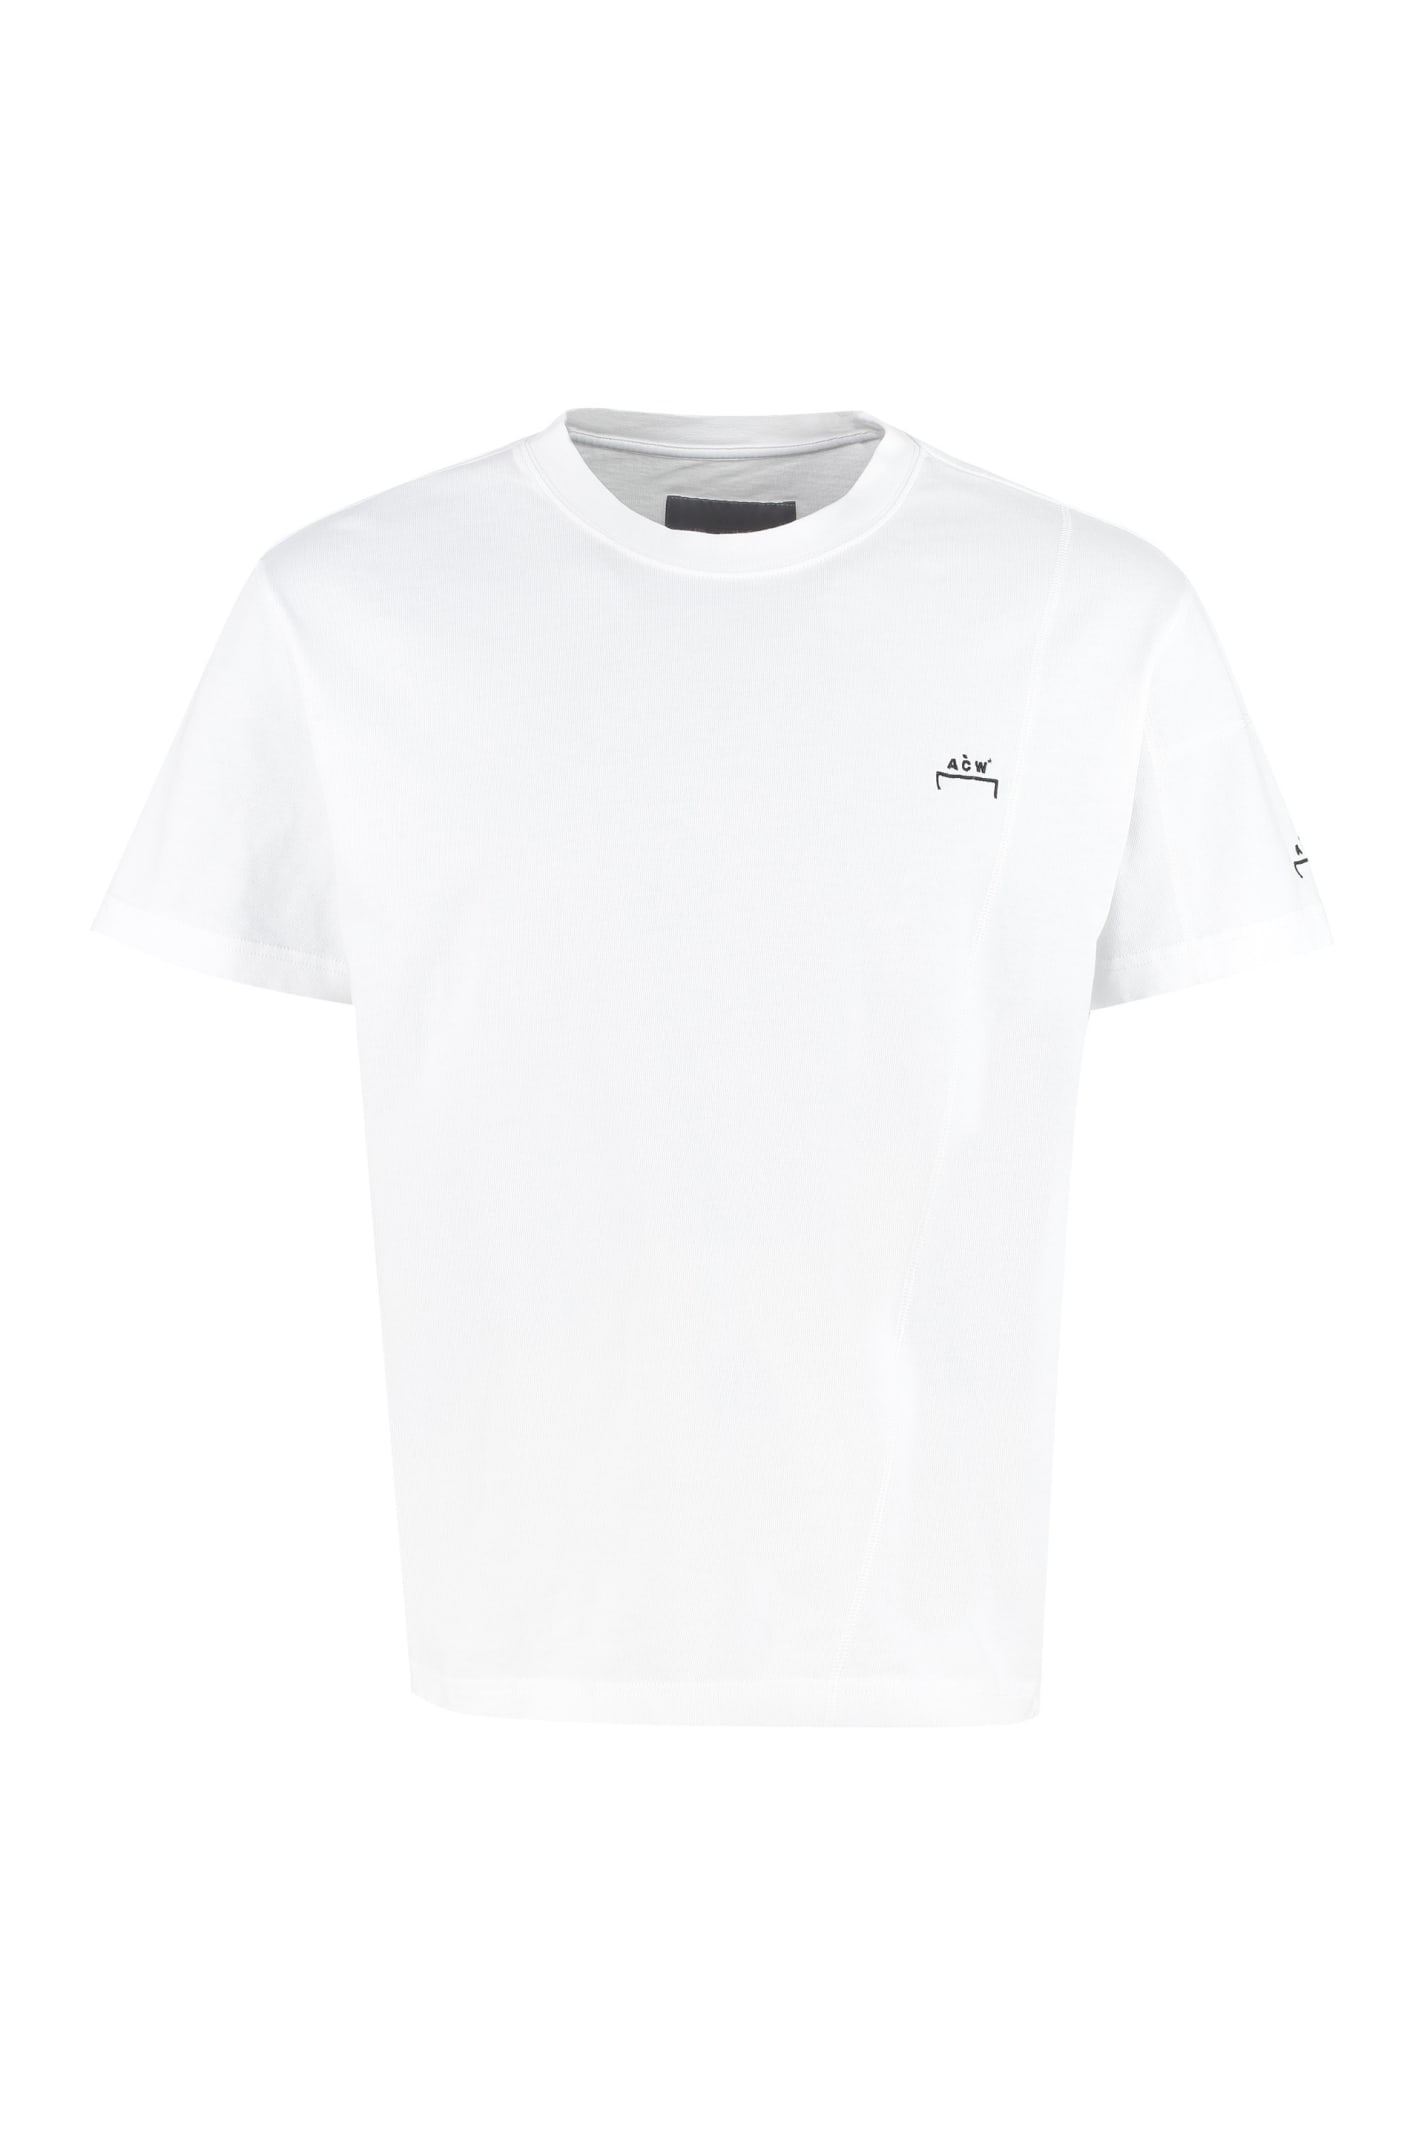 A-COLD-WALL Cotton Crew-neck T-shirt